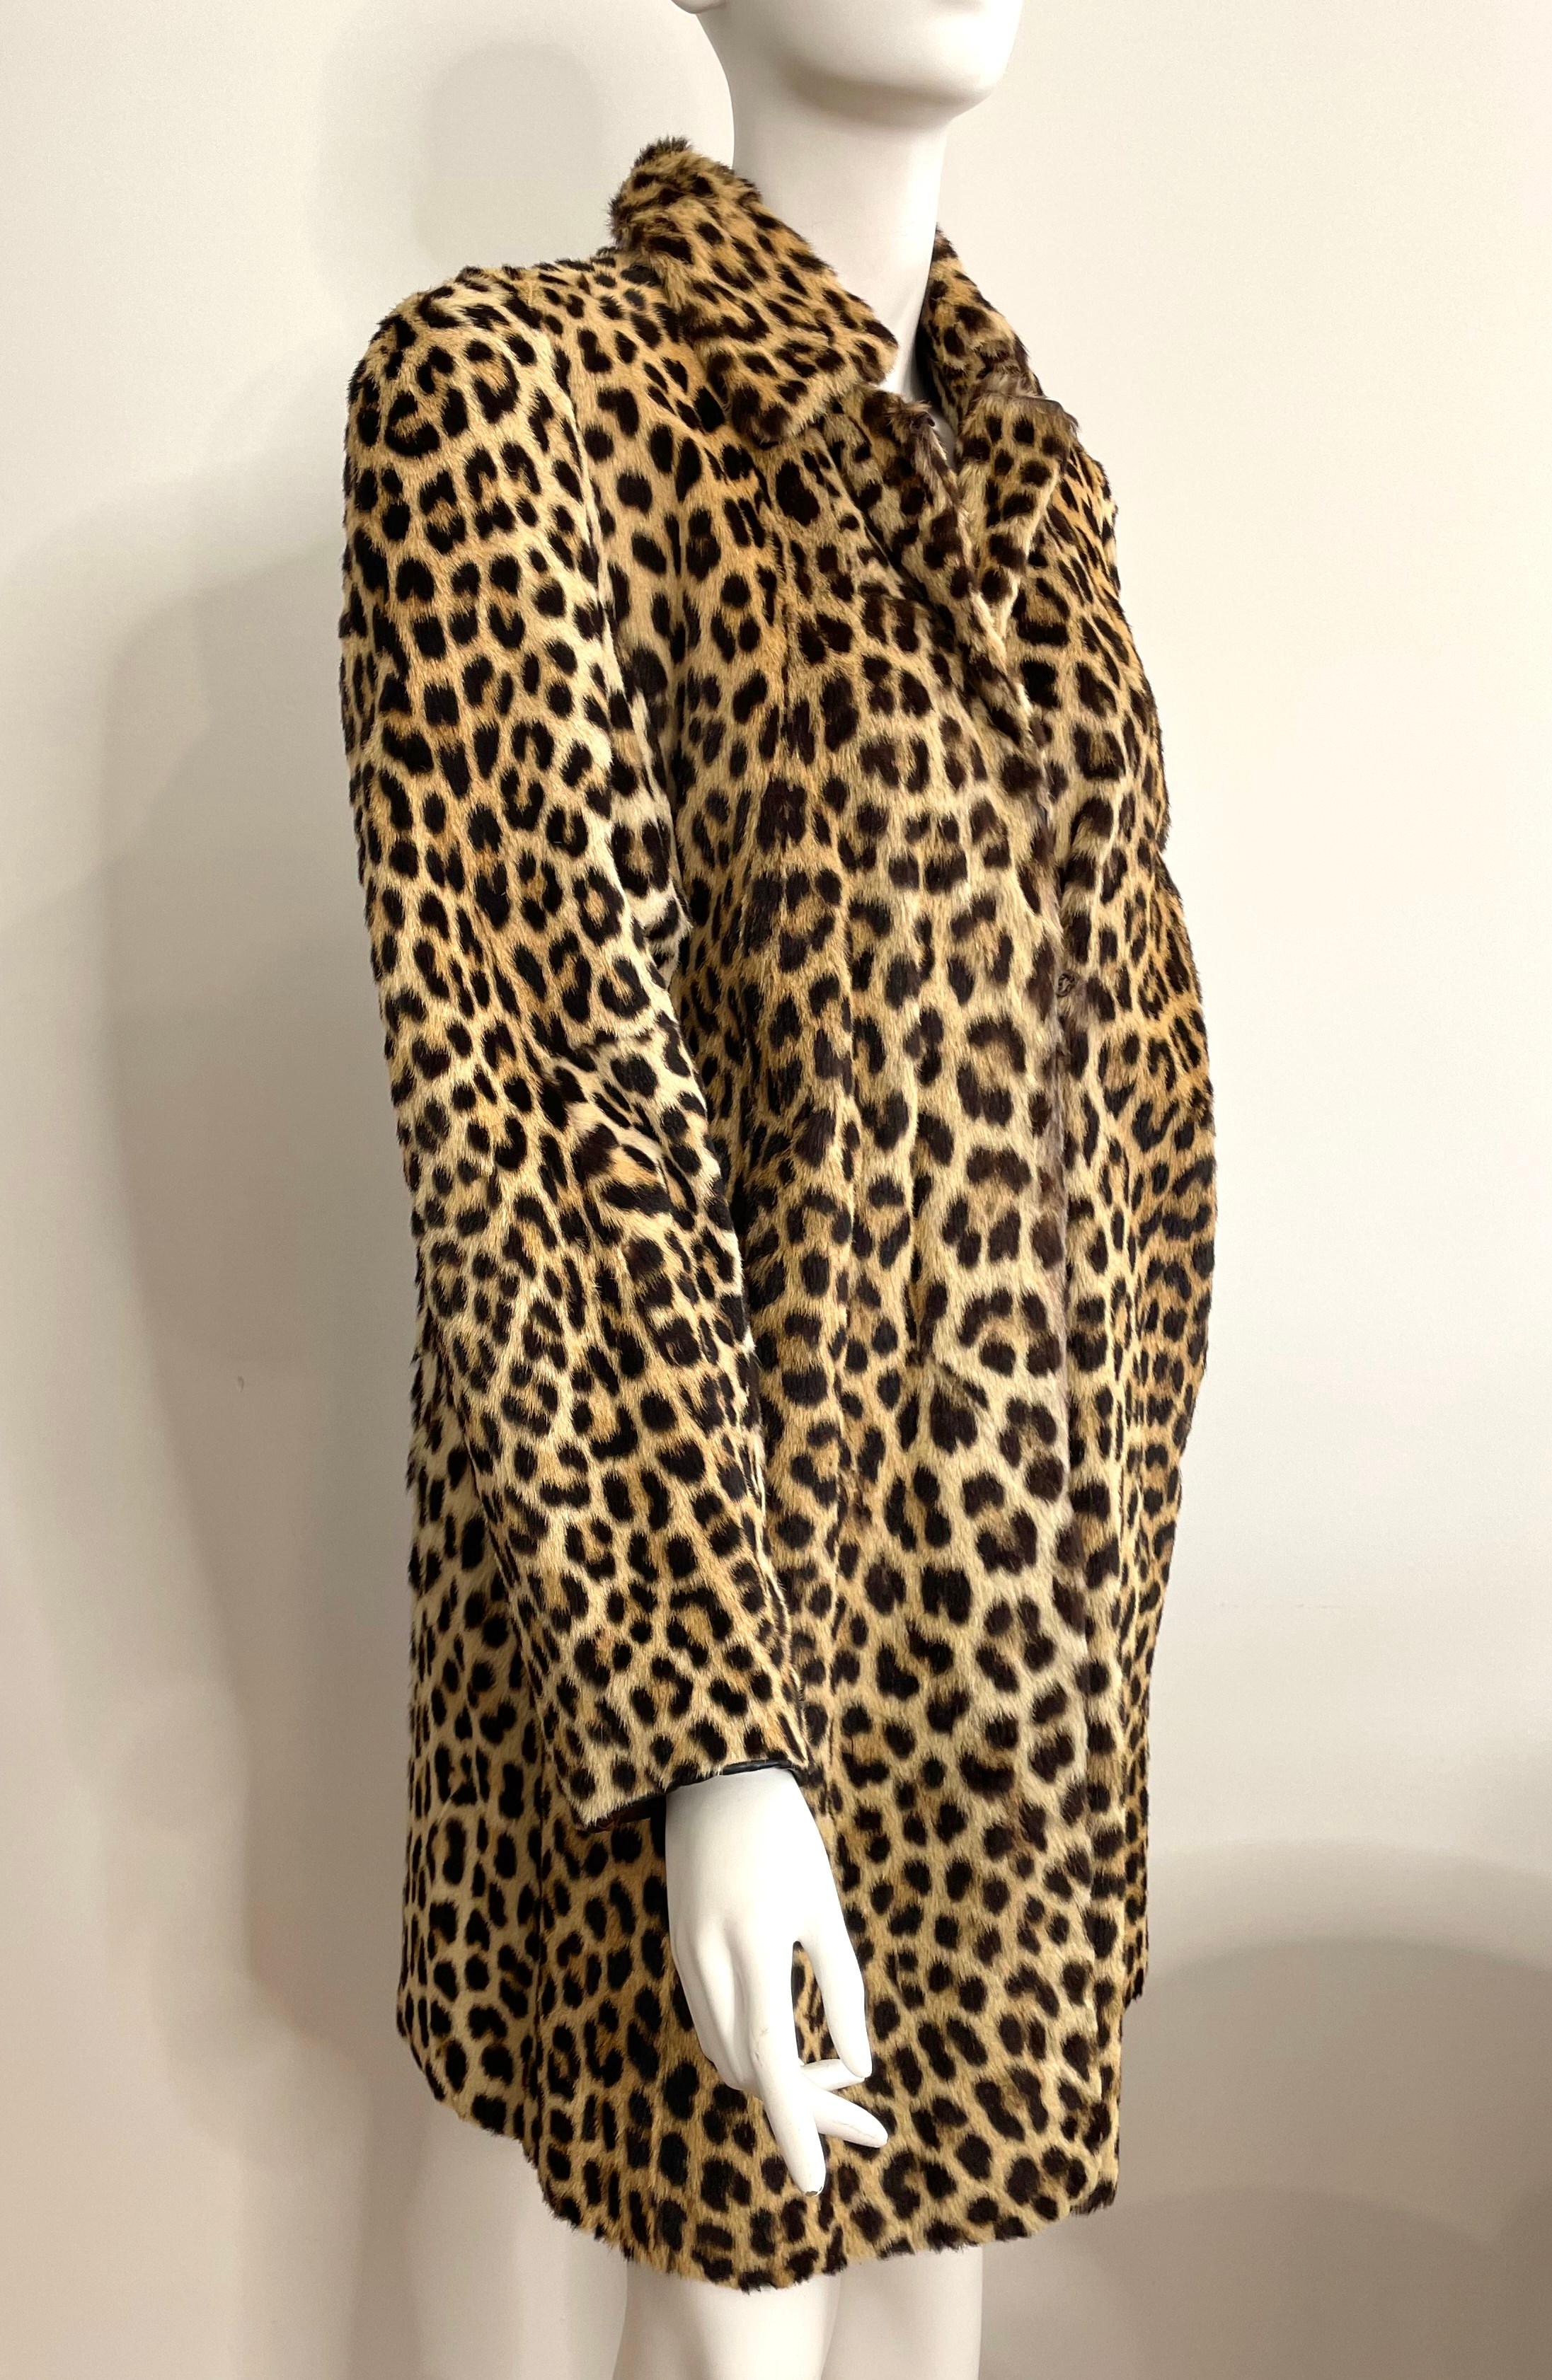 Leopard Pattern Print Fur Car Coat  In Good Condition For Sale In Wallkill, NY